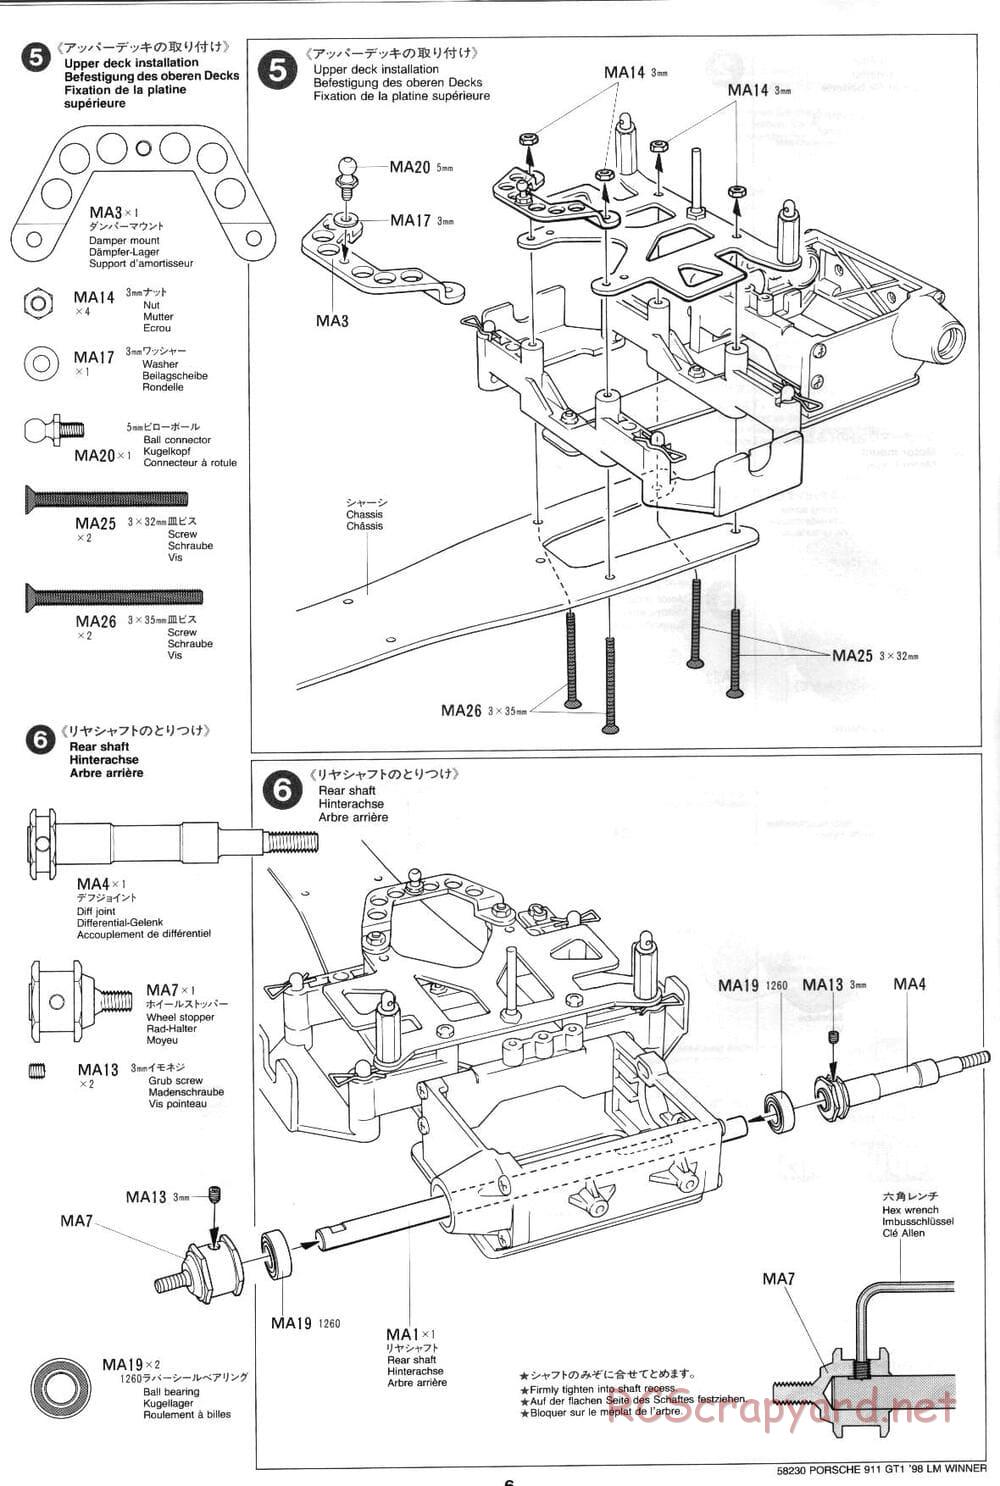 Tamiya - Porsche 911 GT1 98 LM Winner - F103RS Chassis - Manual - Page 6